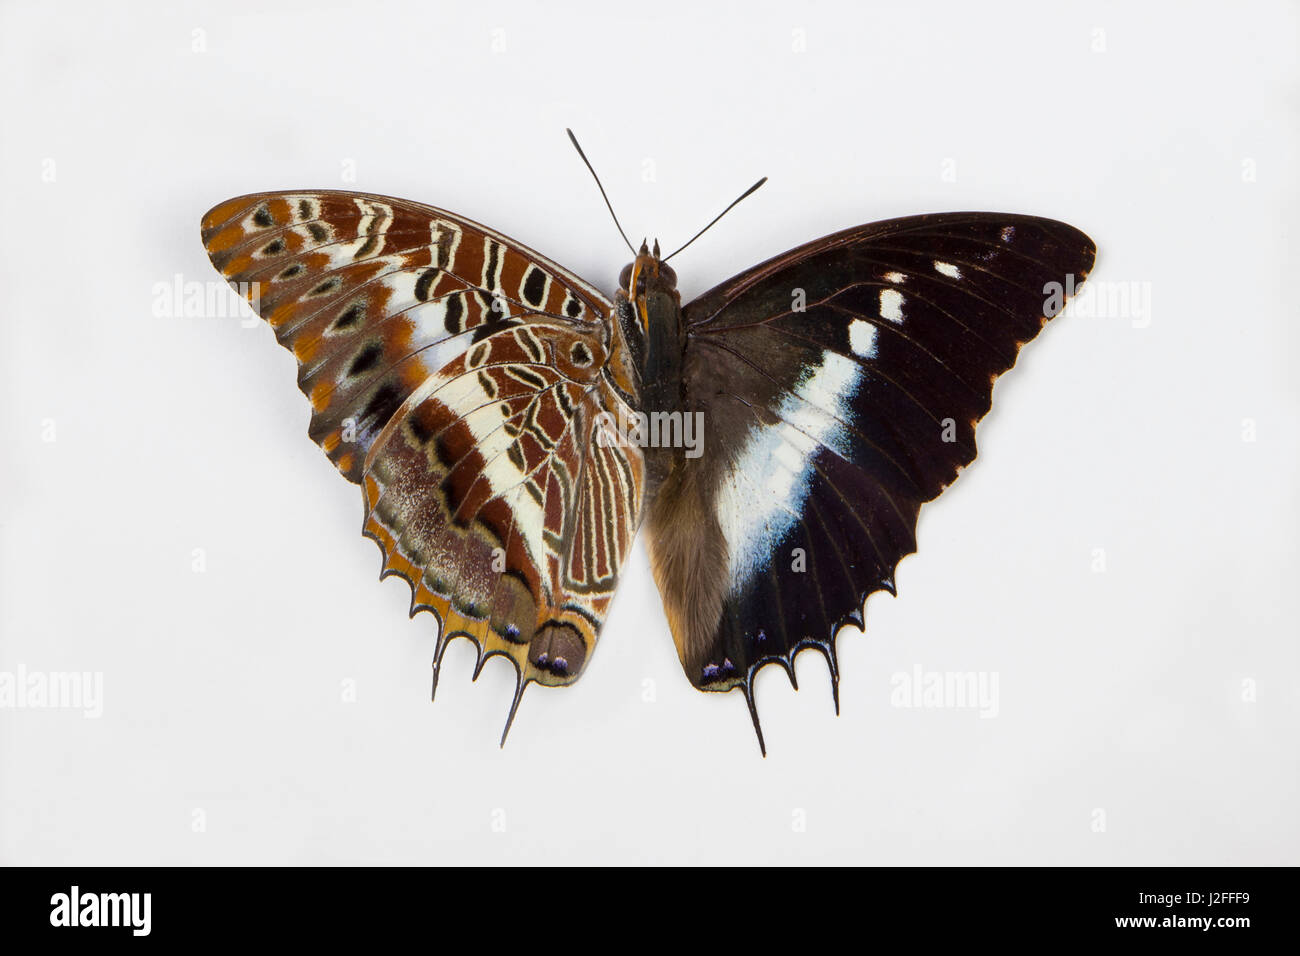 White-barred Emperor Butterfly, Charaxes Brutus wing comparison of the top and bottom side. Stock Photo